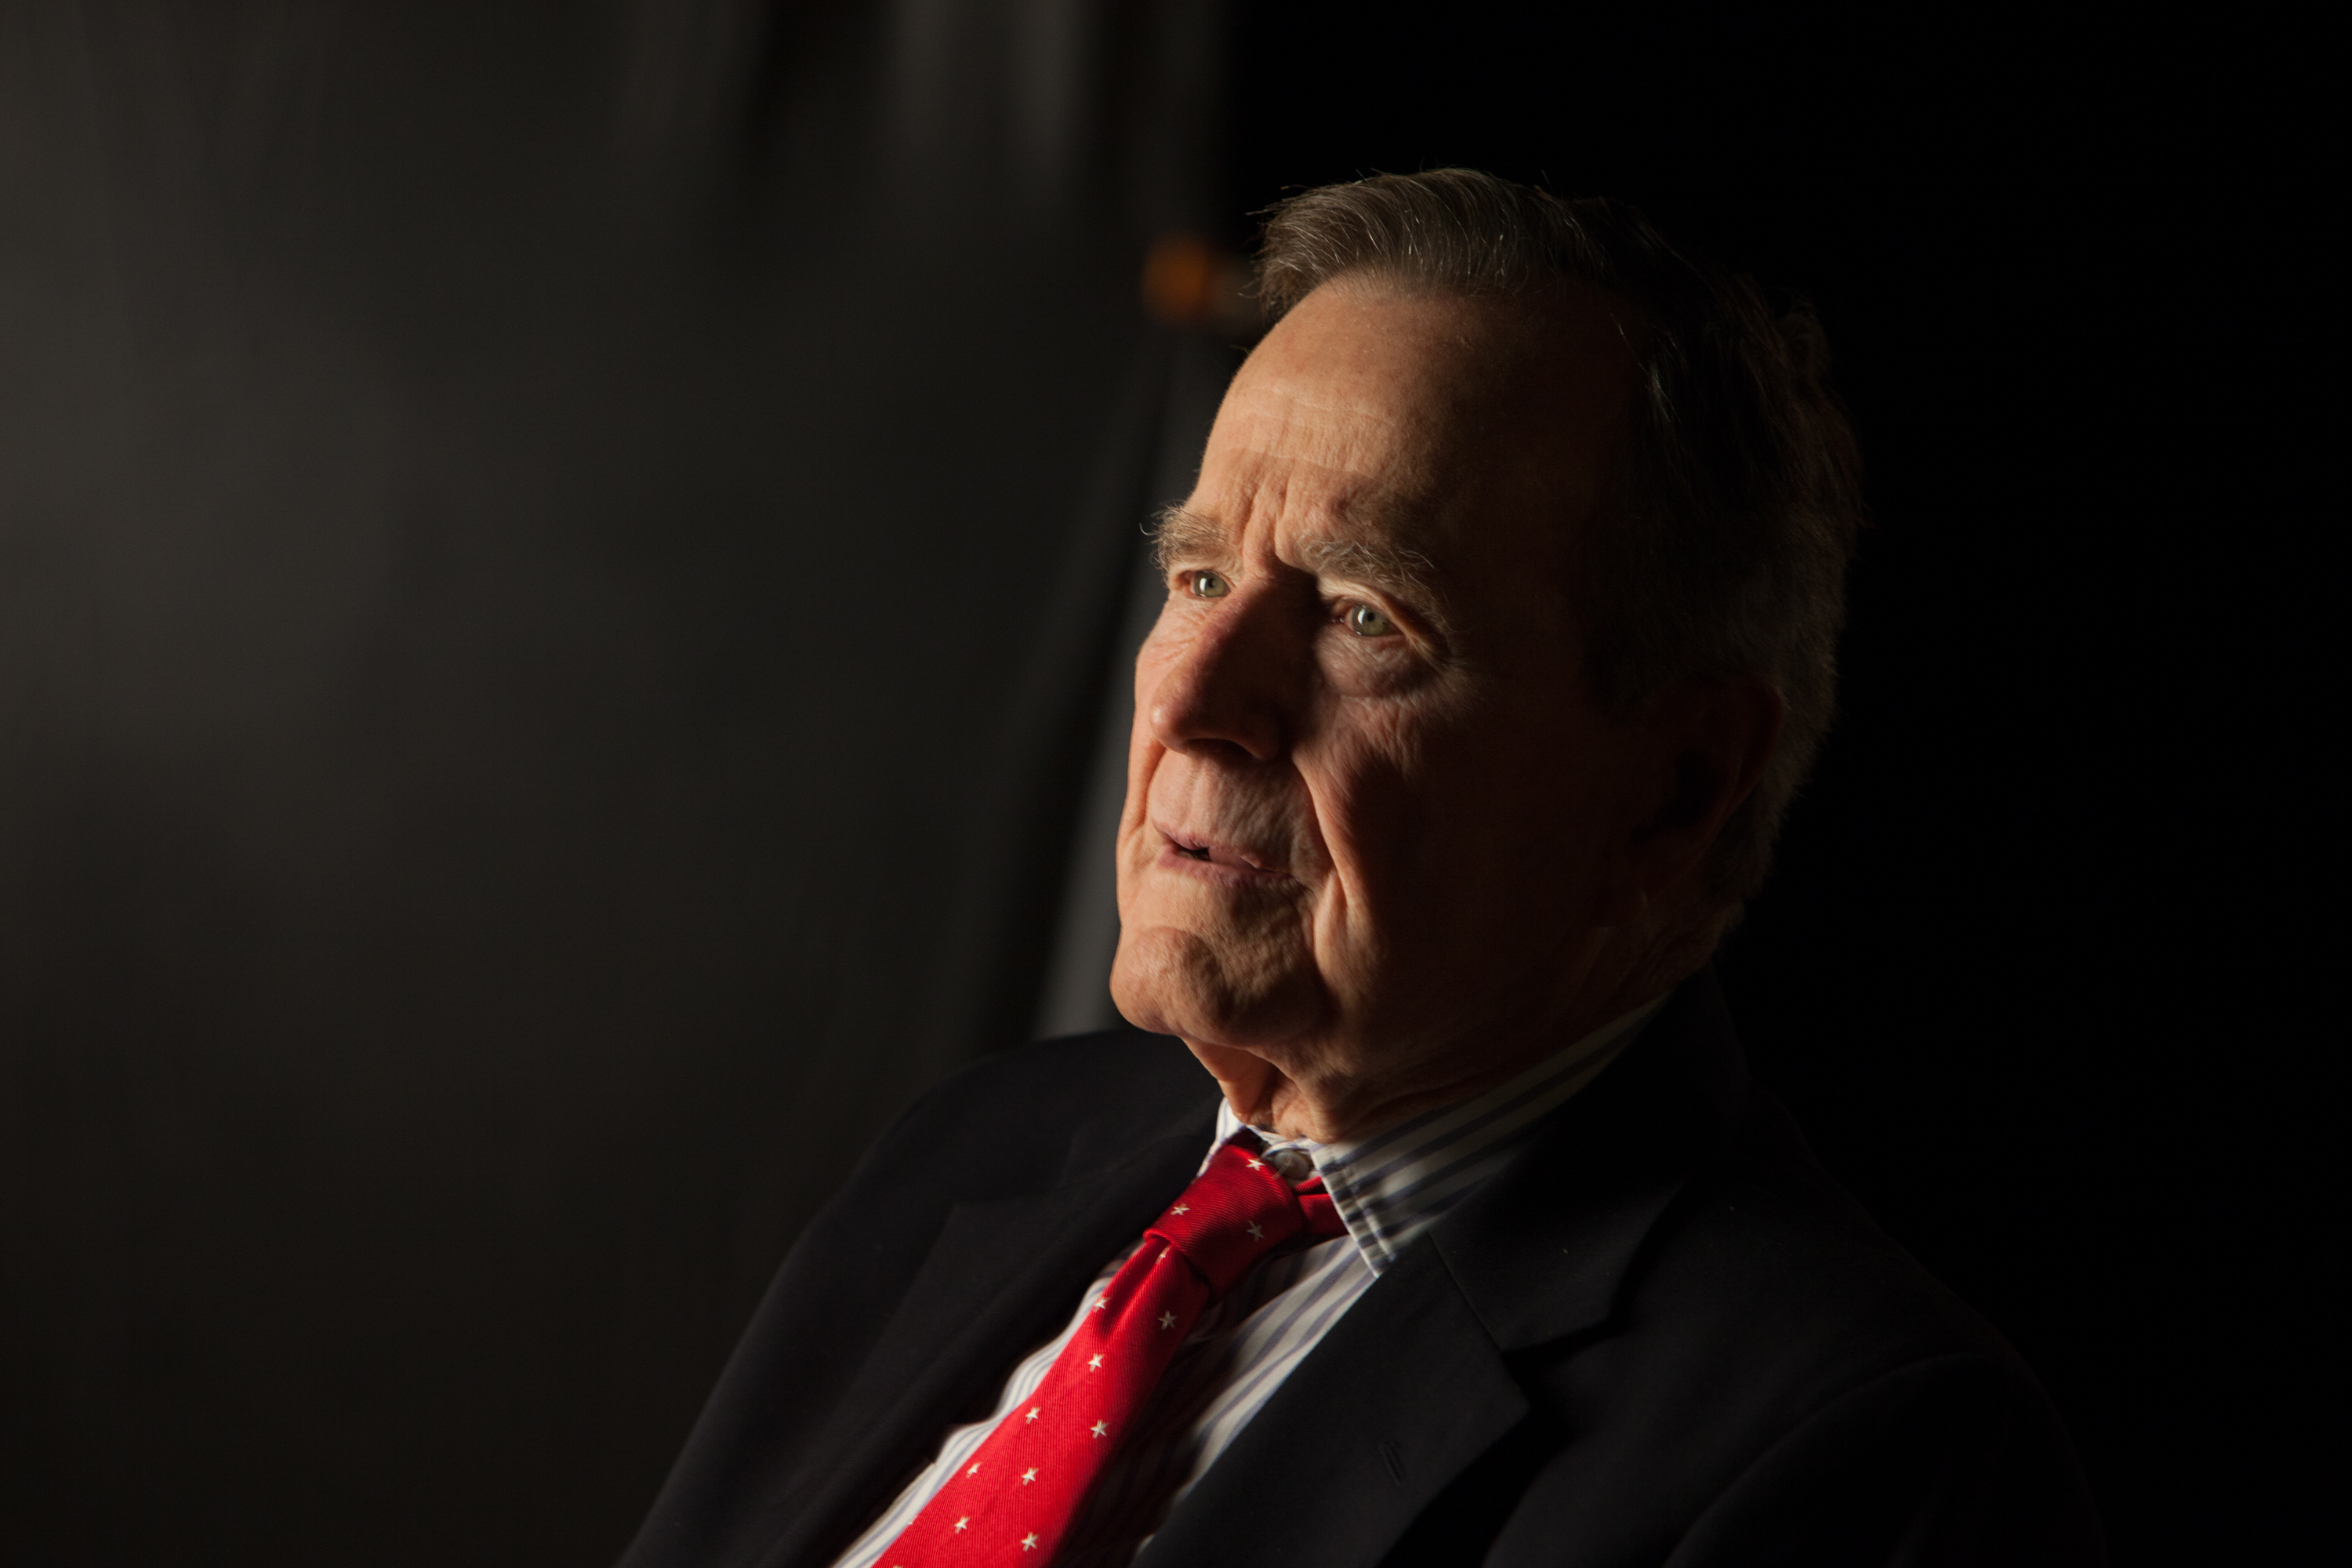 Former President George H.W. Bush is interviewed for 'The Presidents' Gatekeepers' project about the White House Chiefs of Staff at the Bush Library, October 24, 2011, in College Station, Texas. (David Hume Kennerly&mdash;Getty Images)